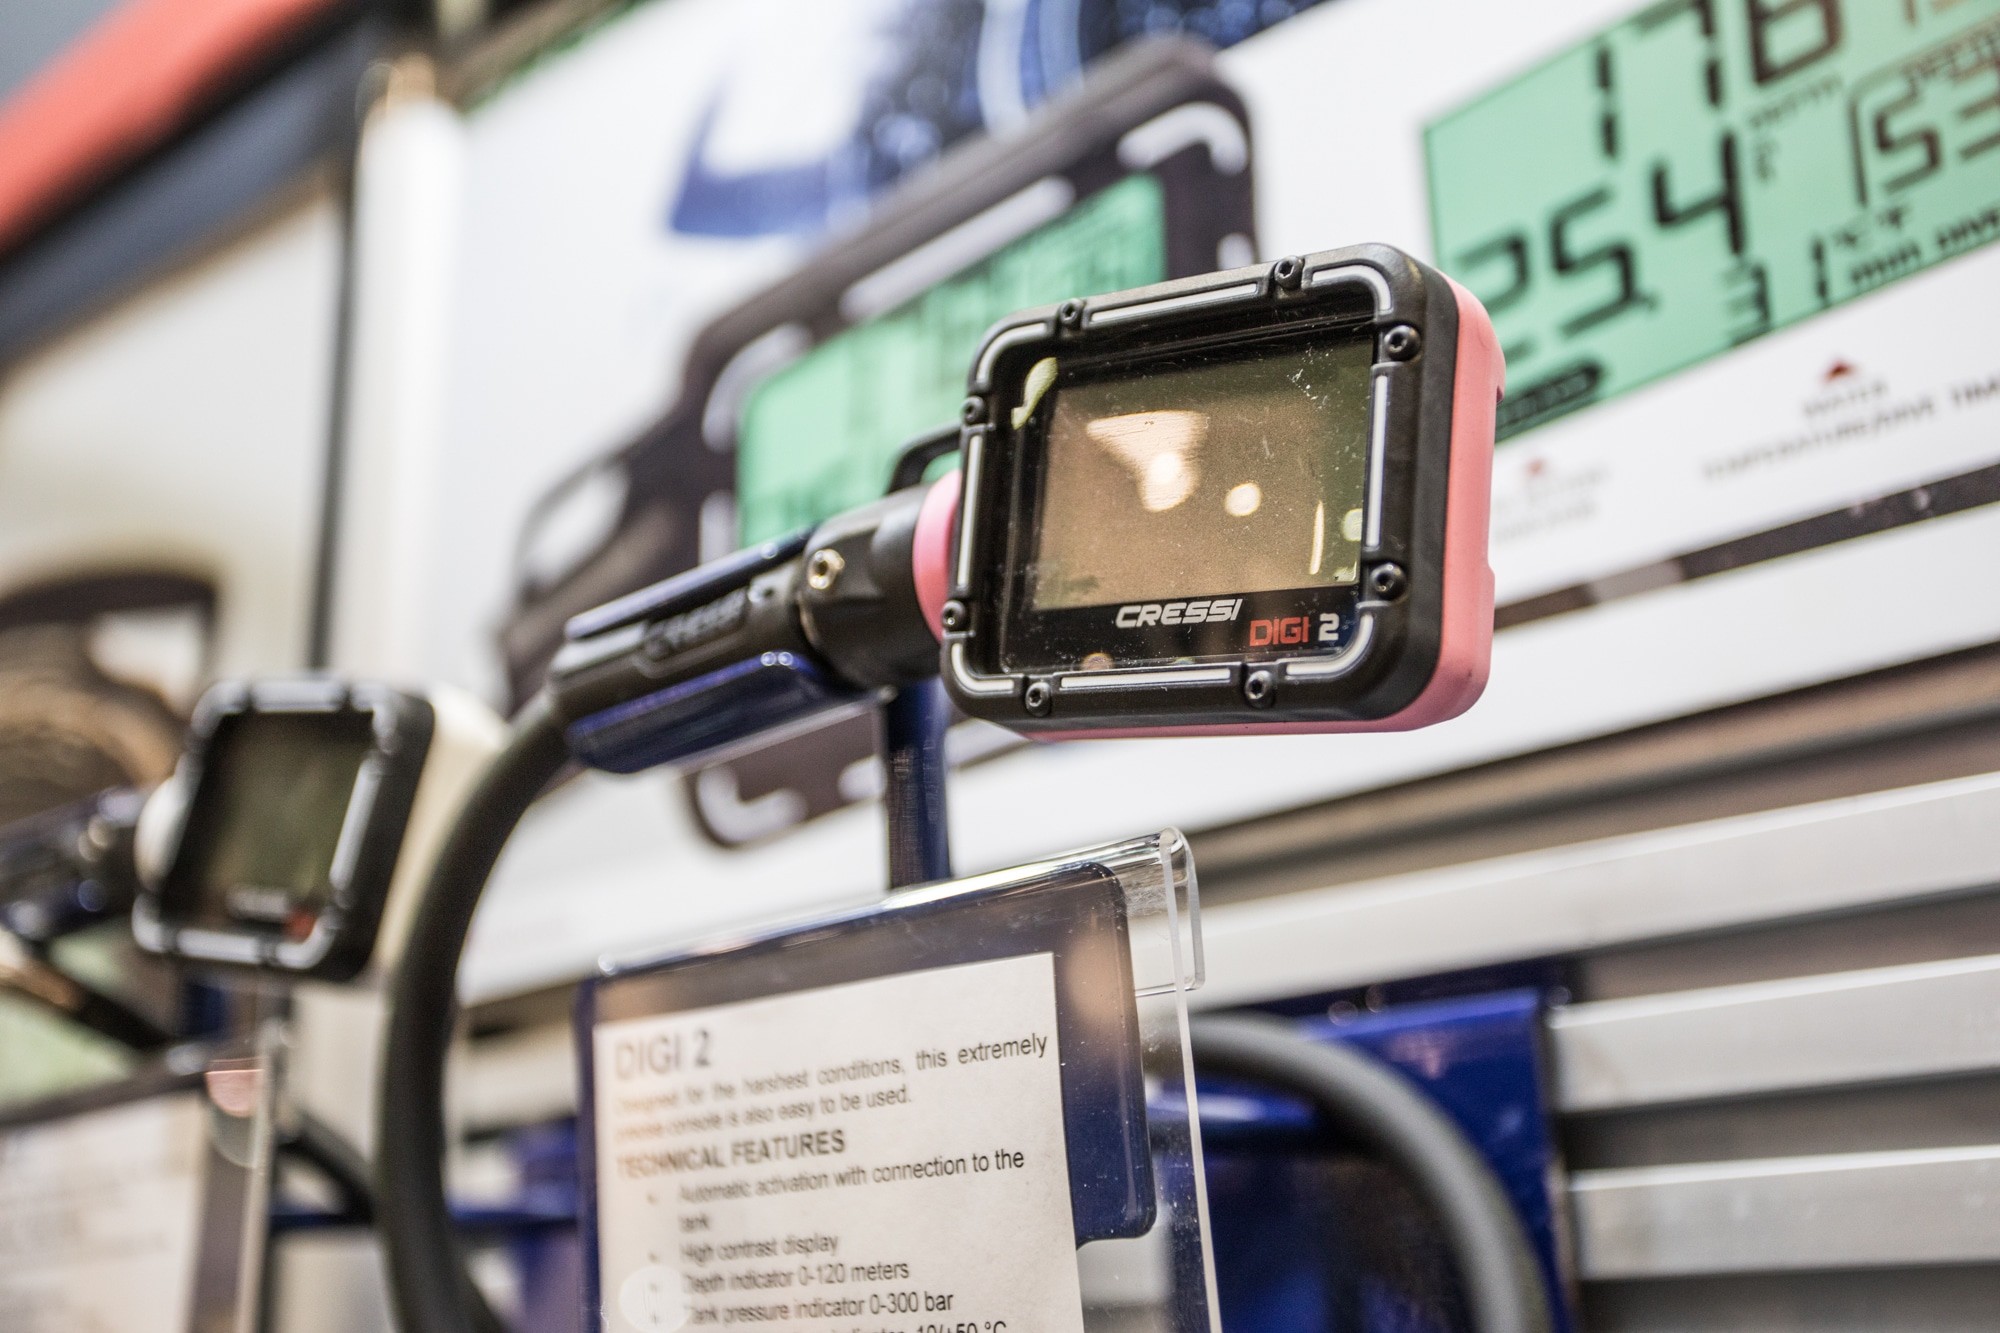 Cressi launched its new digital pressure gauge at Dema Show 2018 (photo by Alex St. Jean)